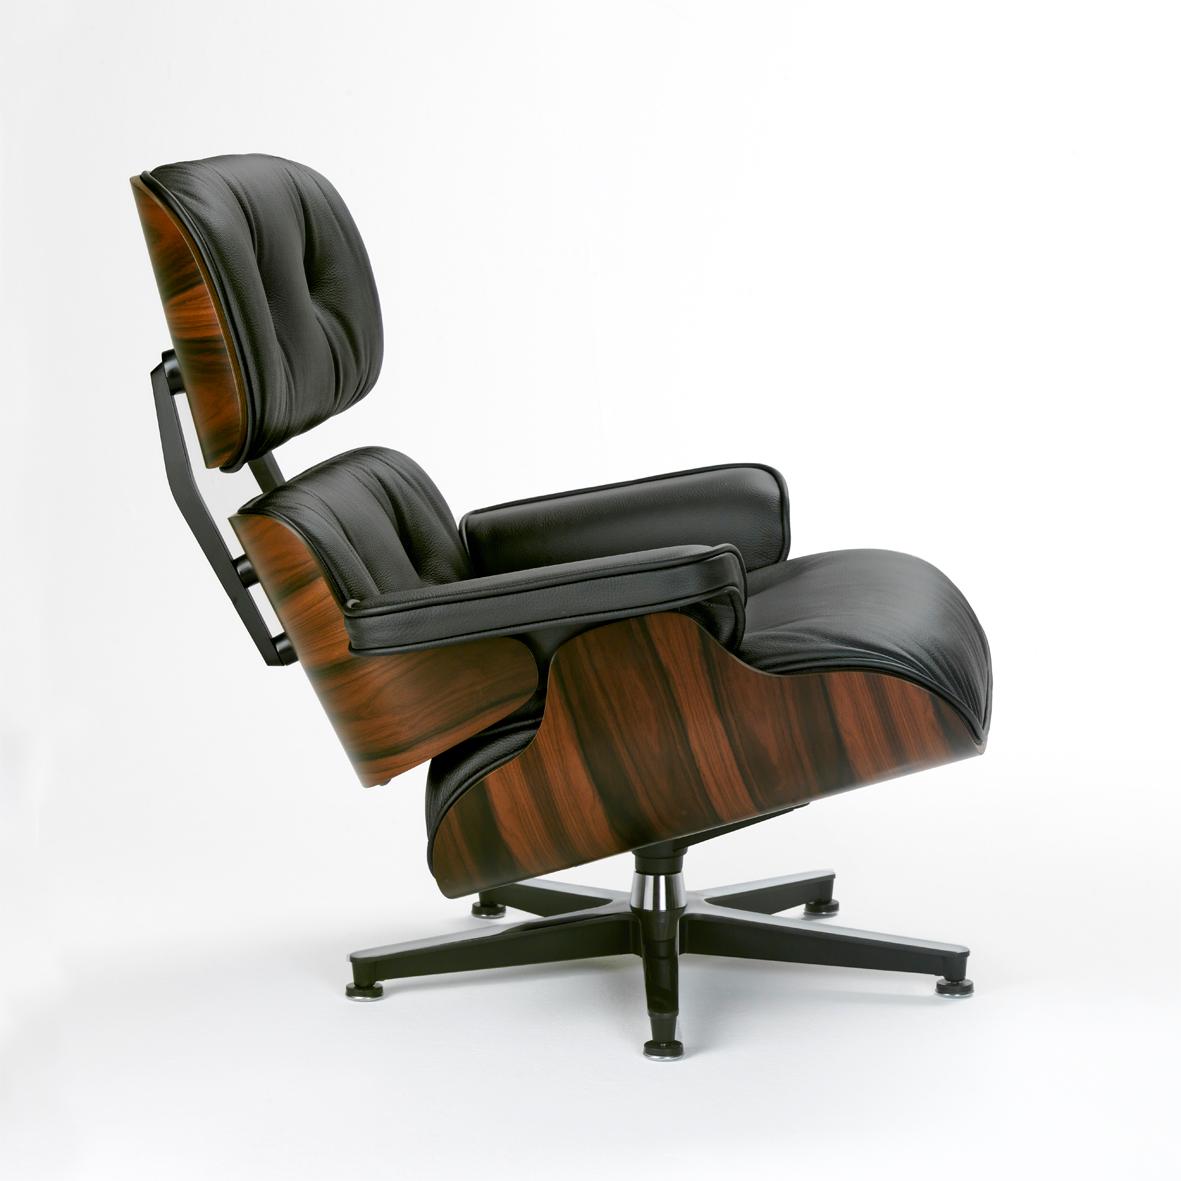 LUX180 Charles Eames - Poltrona in multistrato